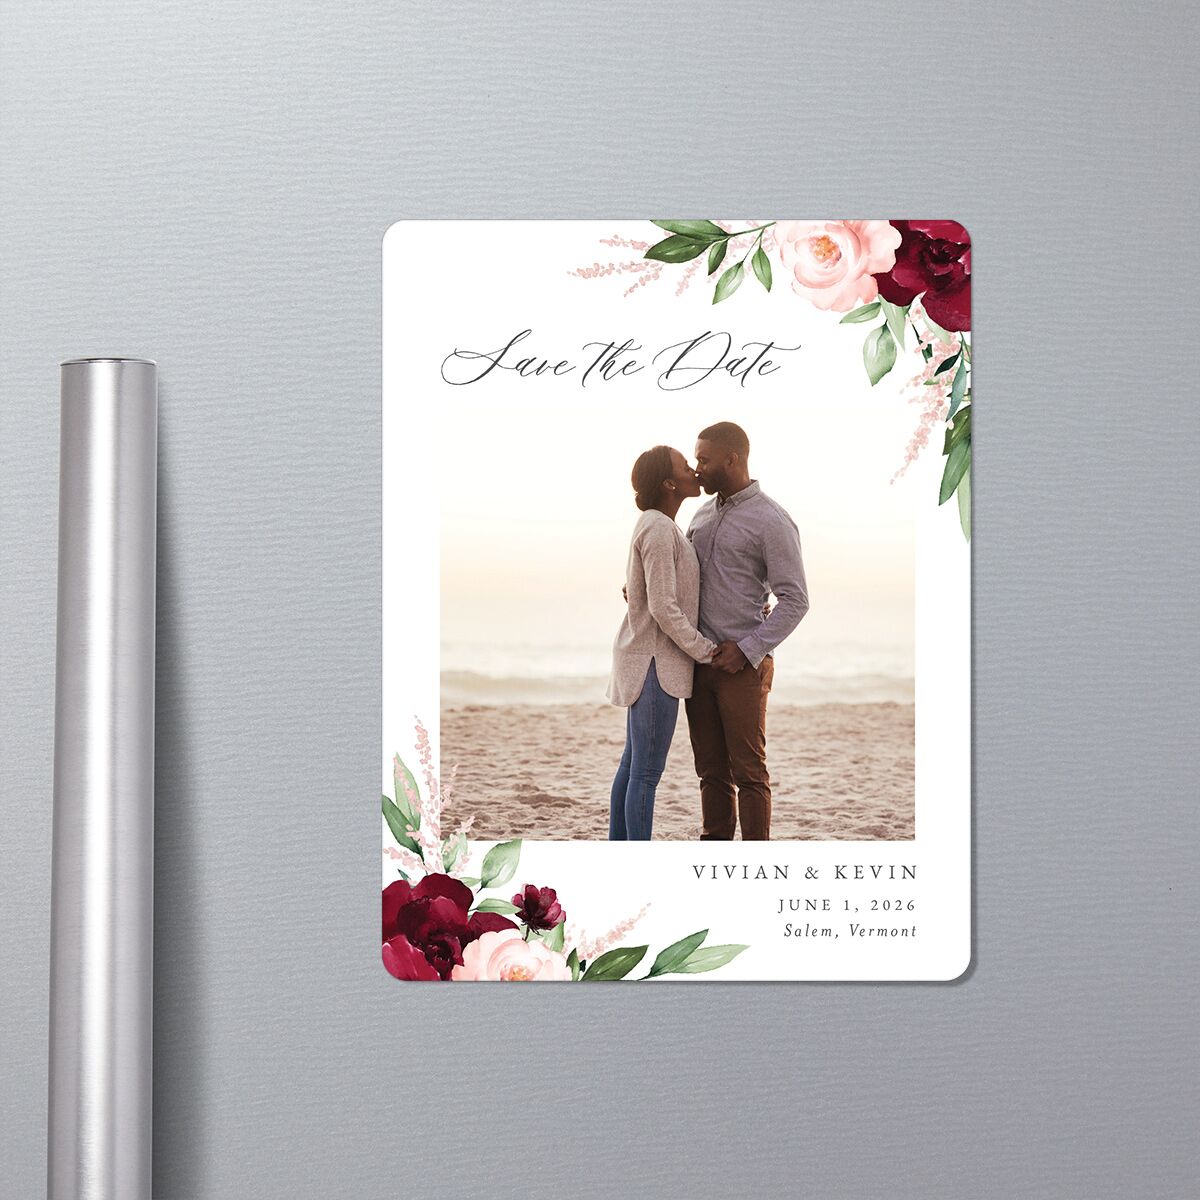 Beloved Floral Save The Date Magnets in-situ in Red